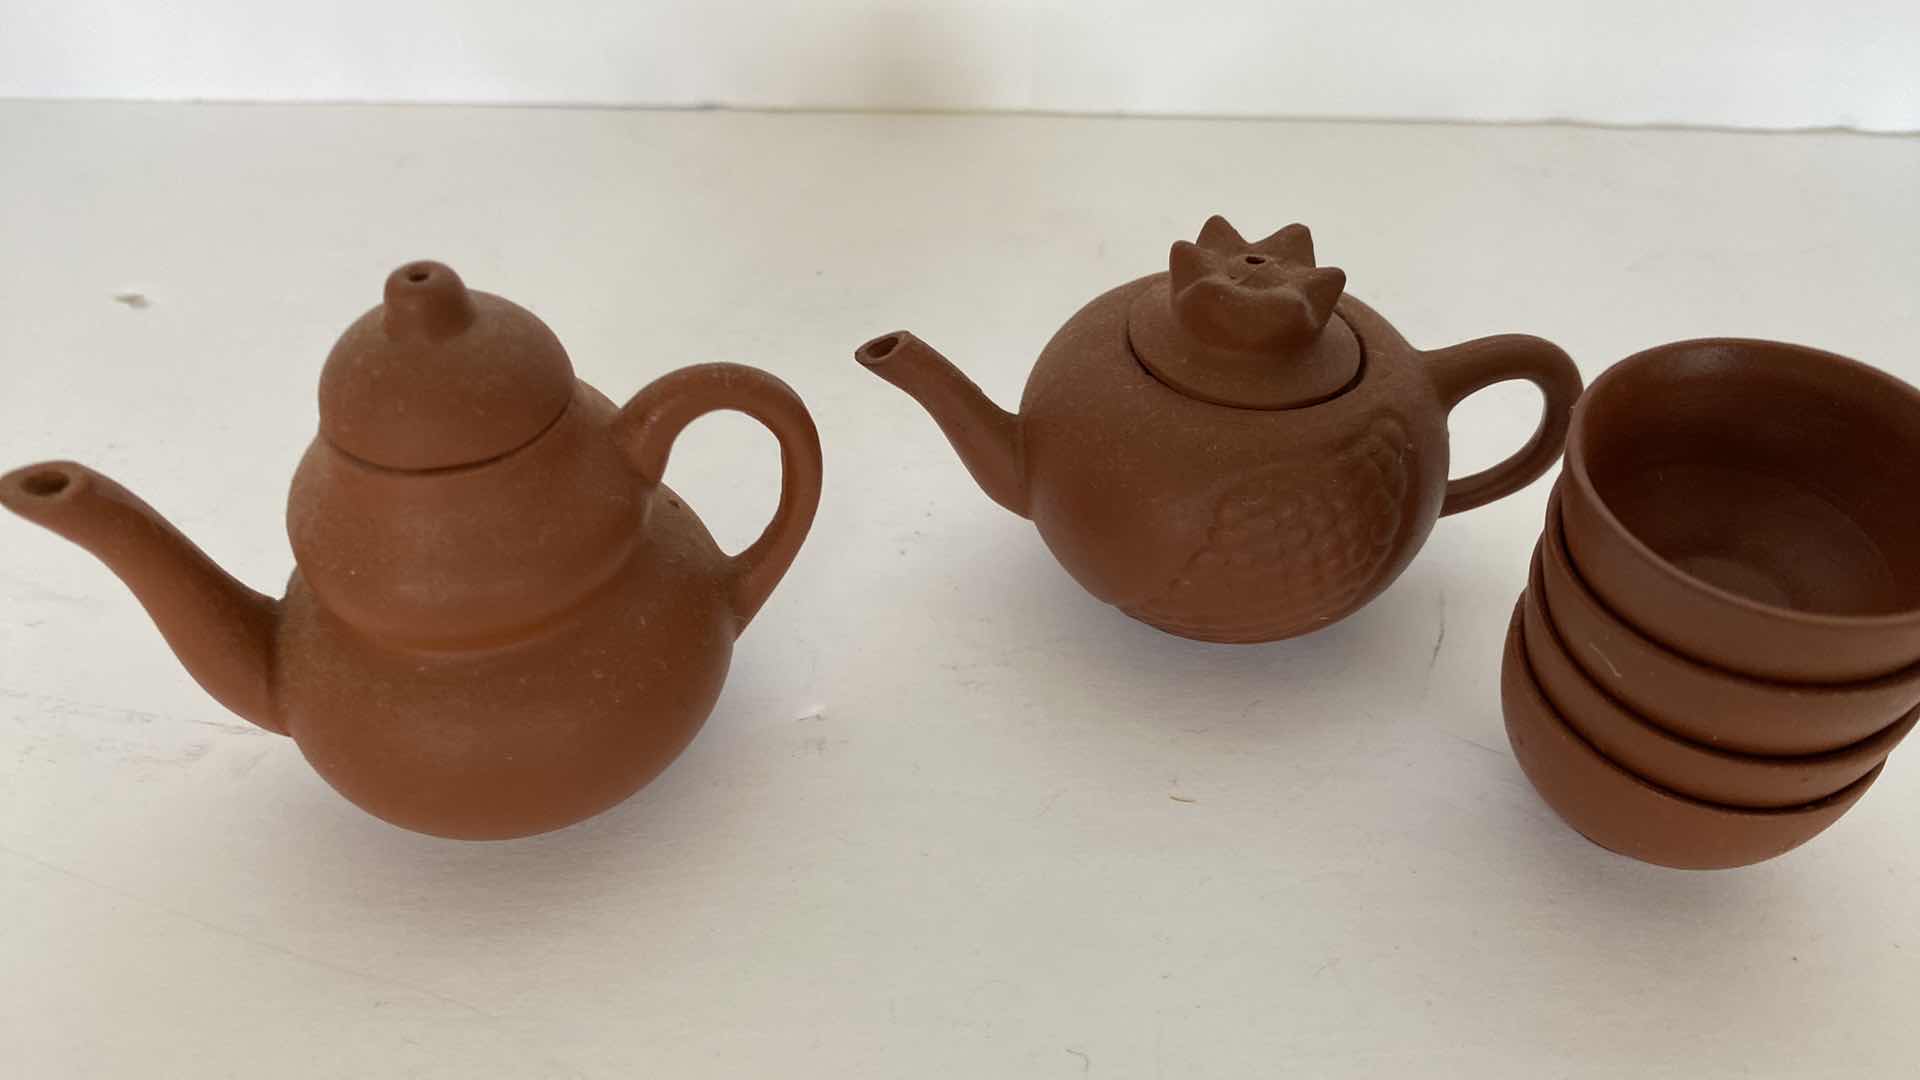 Photo 2 of PAIR OF VINTAGE CHINESE COLLECTIBLE CLAY TEA POTS WITH 4 TEA CUPS LARGEST TEAPOT 3 1/4” x 1 3/4”